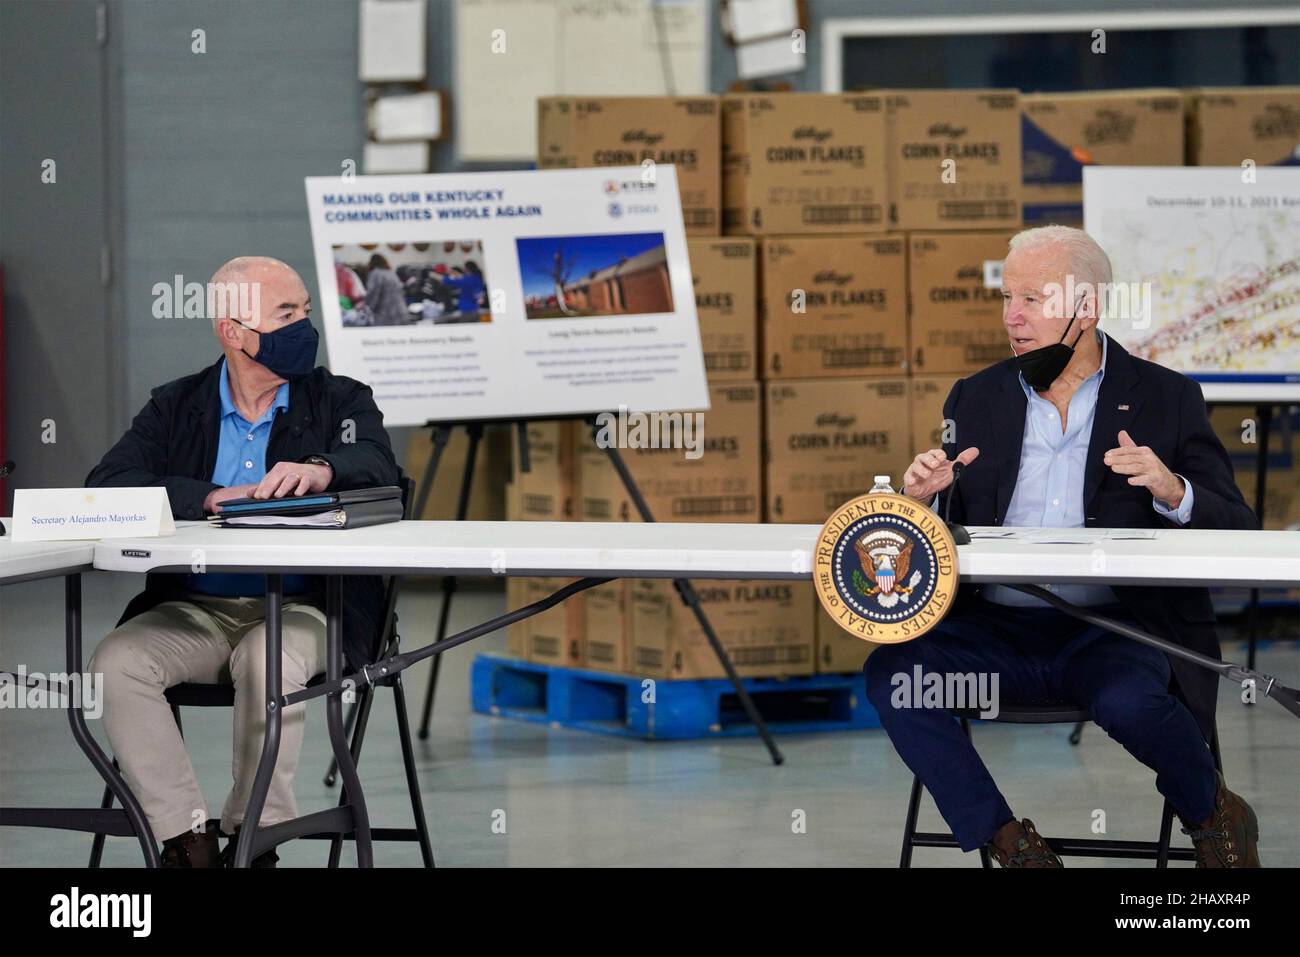 Mayfield, United States Of America. 15th Dec, 2021. Mayfield, United States of America. 15 December, 2021. U.S. President Joe Biden, right, comments as Secretary of Homeland Security Alejandro Mayorkas looks on during a briefing on the recent devastating tornados at the Mayfield Graves County Airport December 15, 2021 in Mayfield, Kentucky. Credit: Alexis Hall/FEMA/Alamy Live News Stock Photo